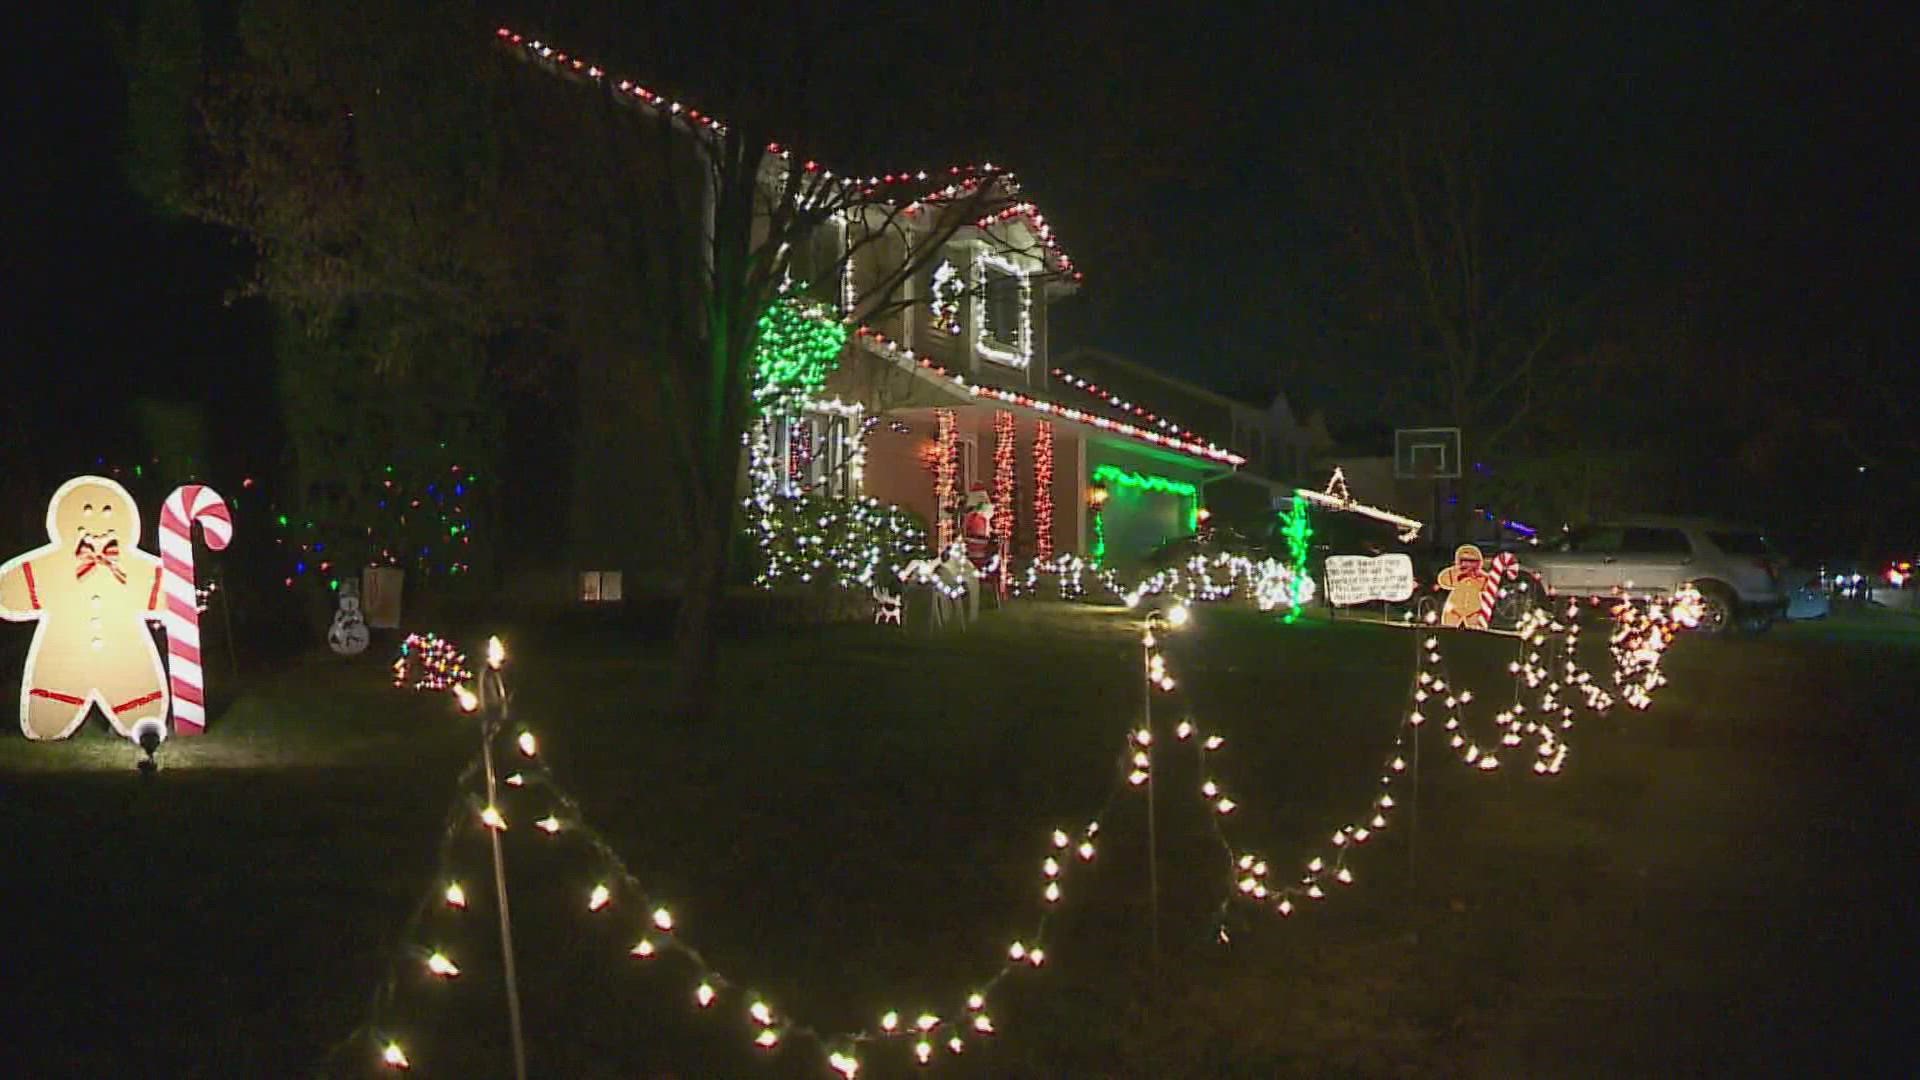 Check out the festive decorations Local 5 photographer Mike Simmons found across central Iowa!